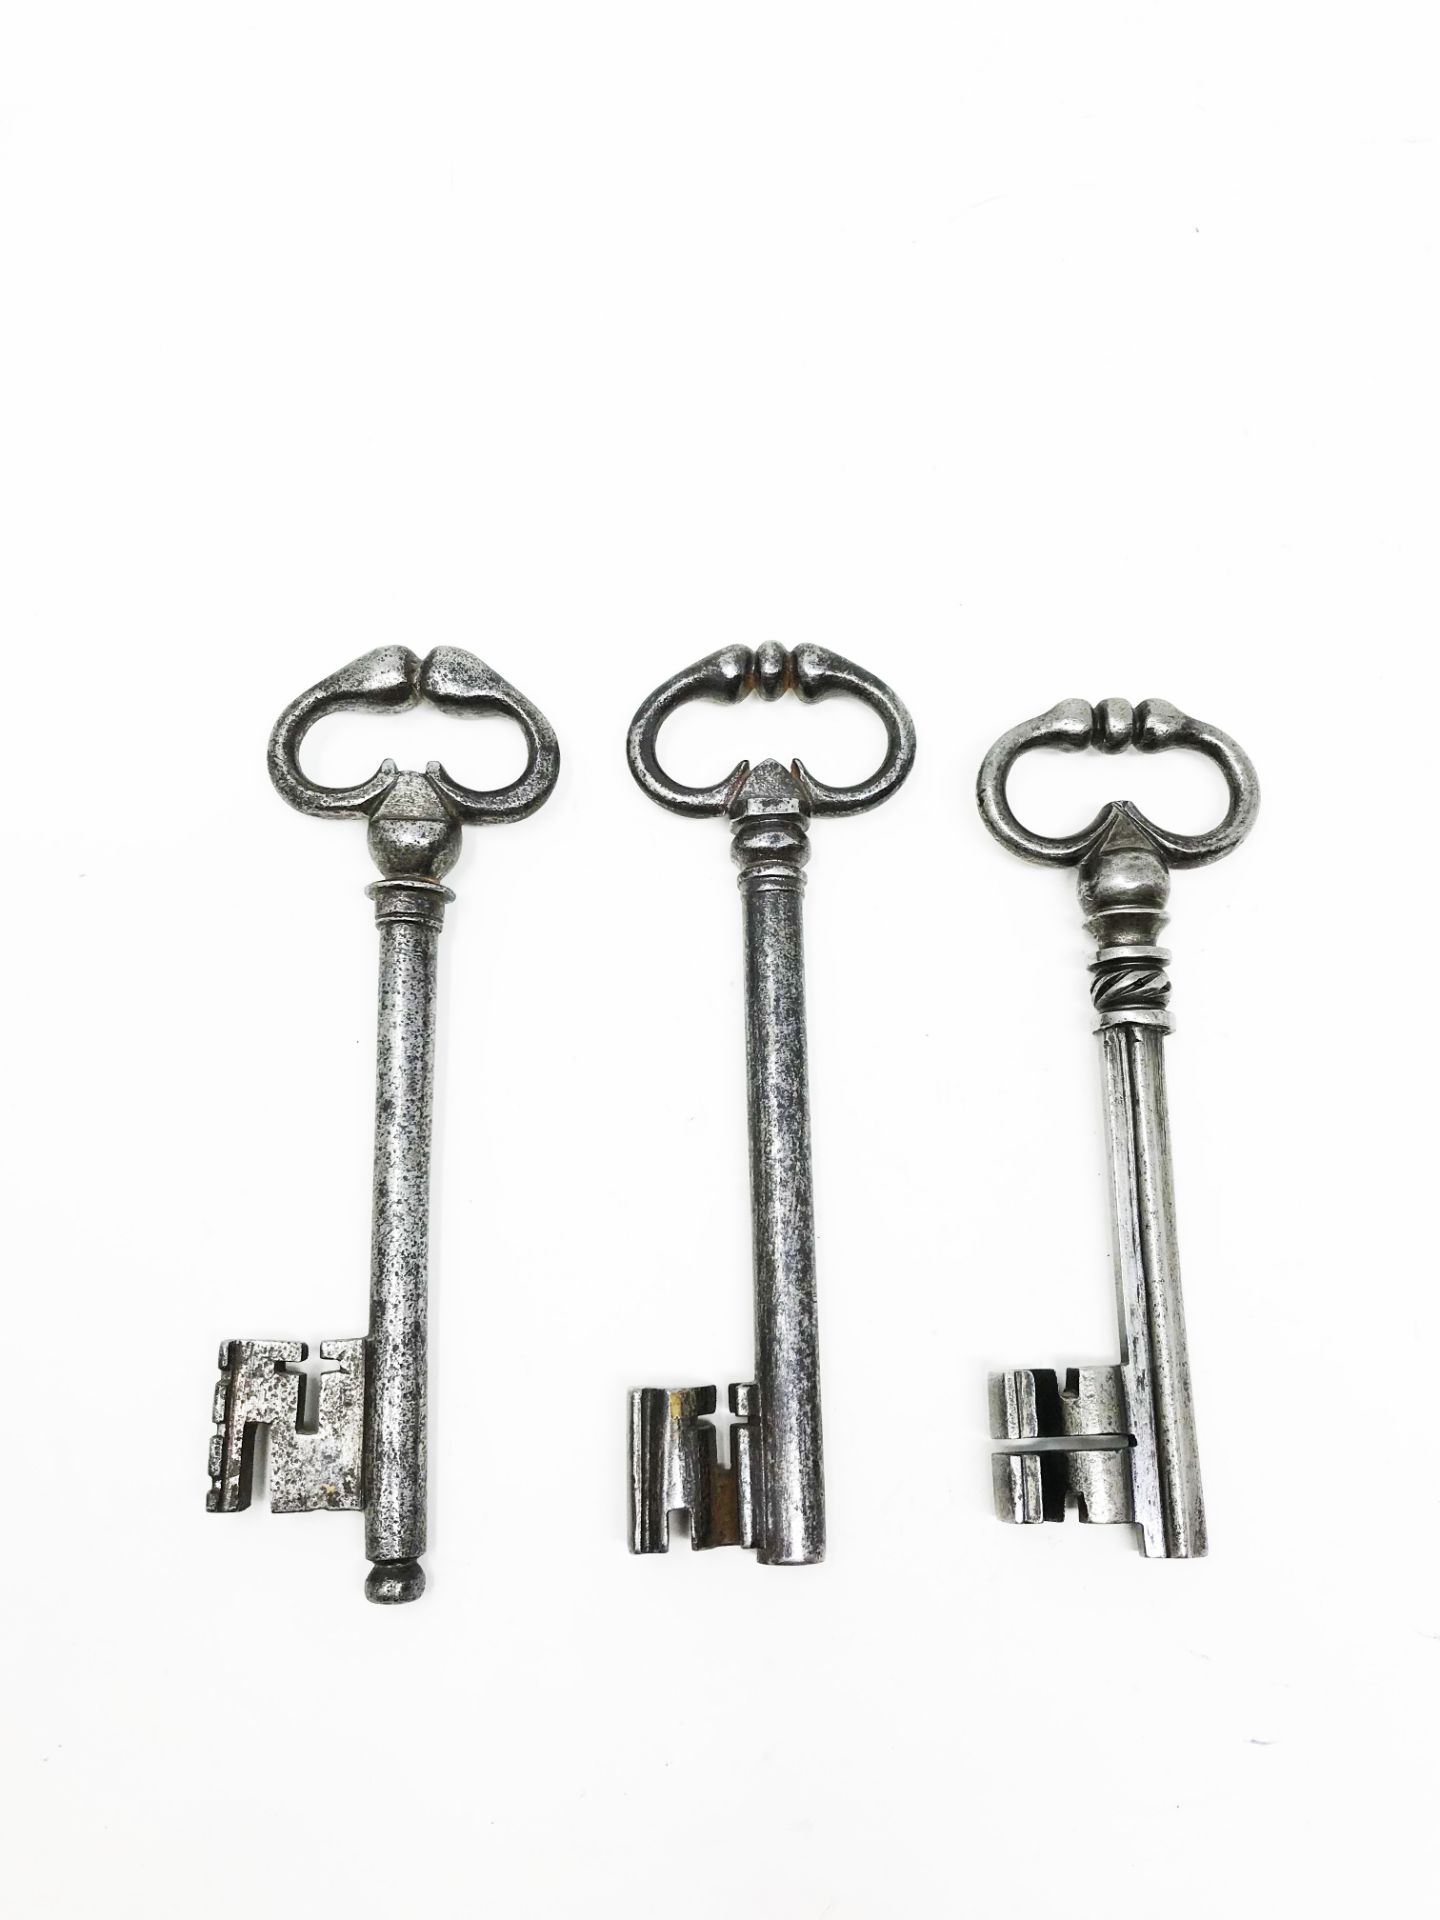 Three keys with frog's legs rings13, 96 - 13, 44 - 12, 25 cmPart of the chapter "From